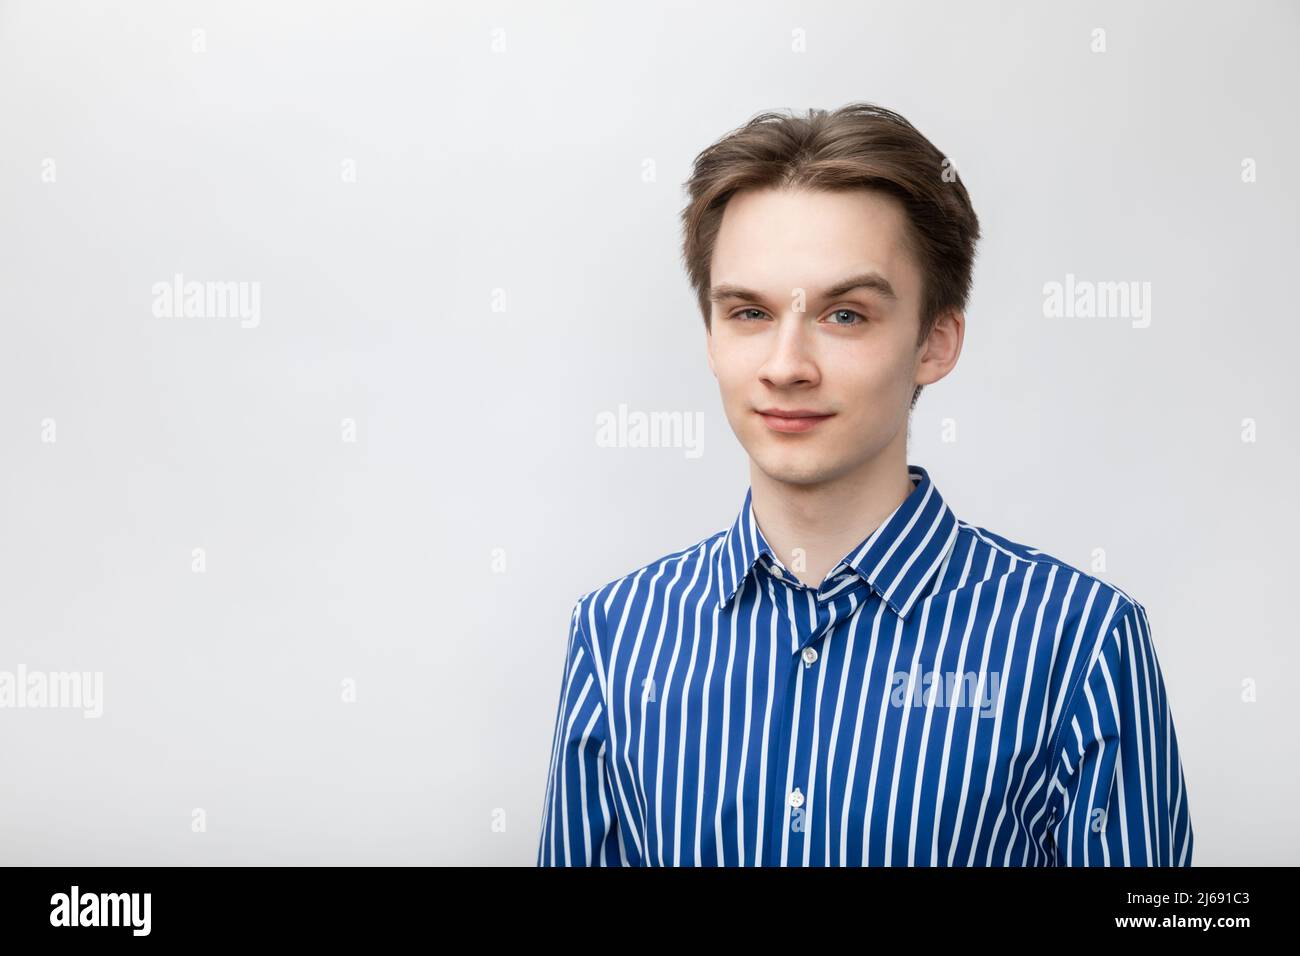 Portrait of confident and cheerful young man wearing blue-white striped button shirt looking at camera with one eyebrow raised. Studio shot on gray ba Stock Photo